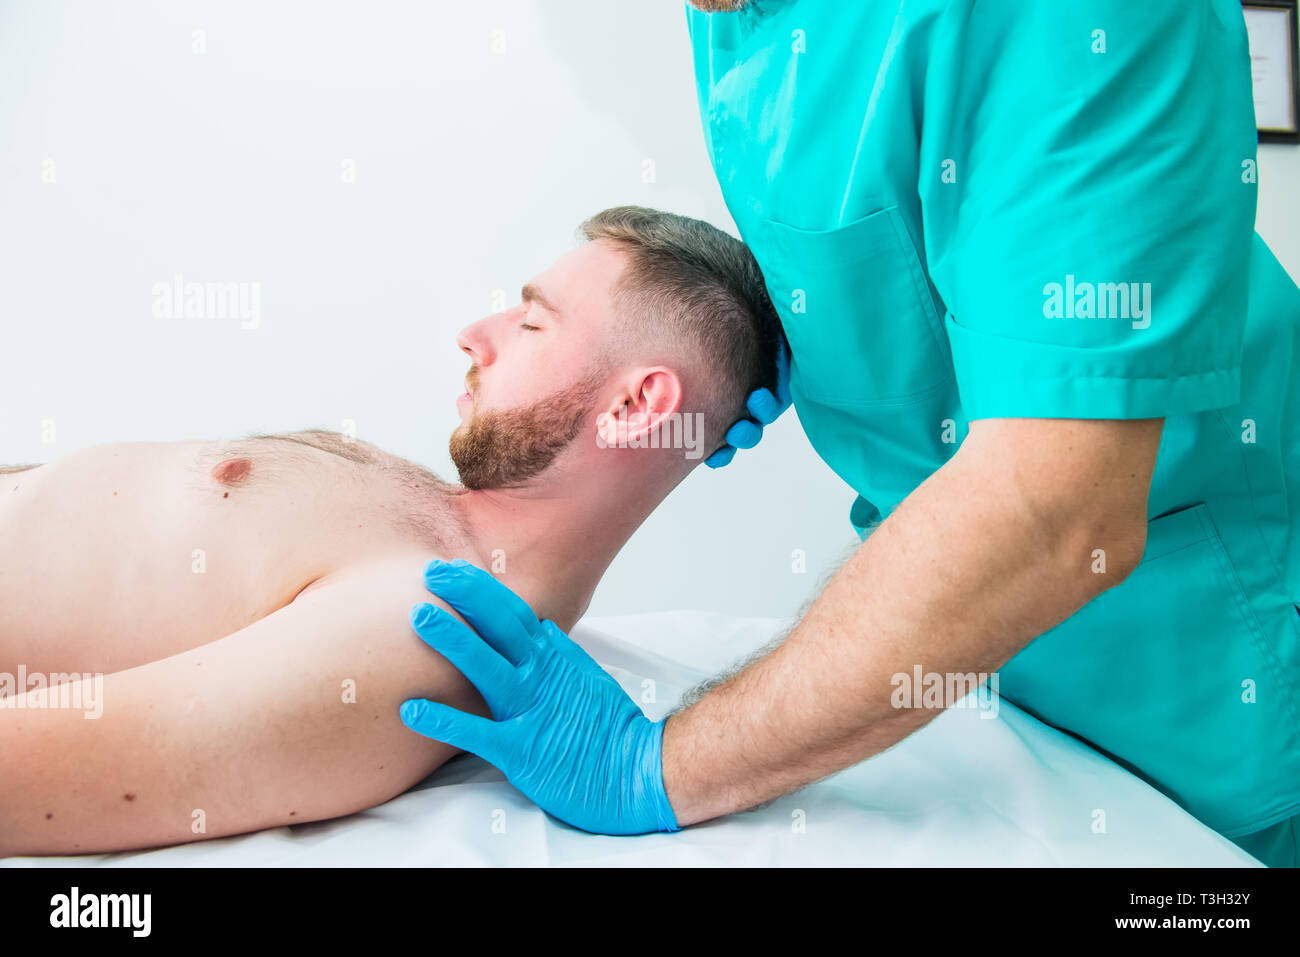 Male patient receiving massage from therapist. A chiropractor stretching his patient's neck in medical office. Neurological physical examination. Oste Stock Photo